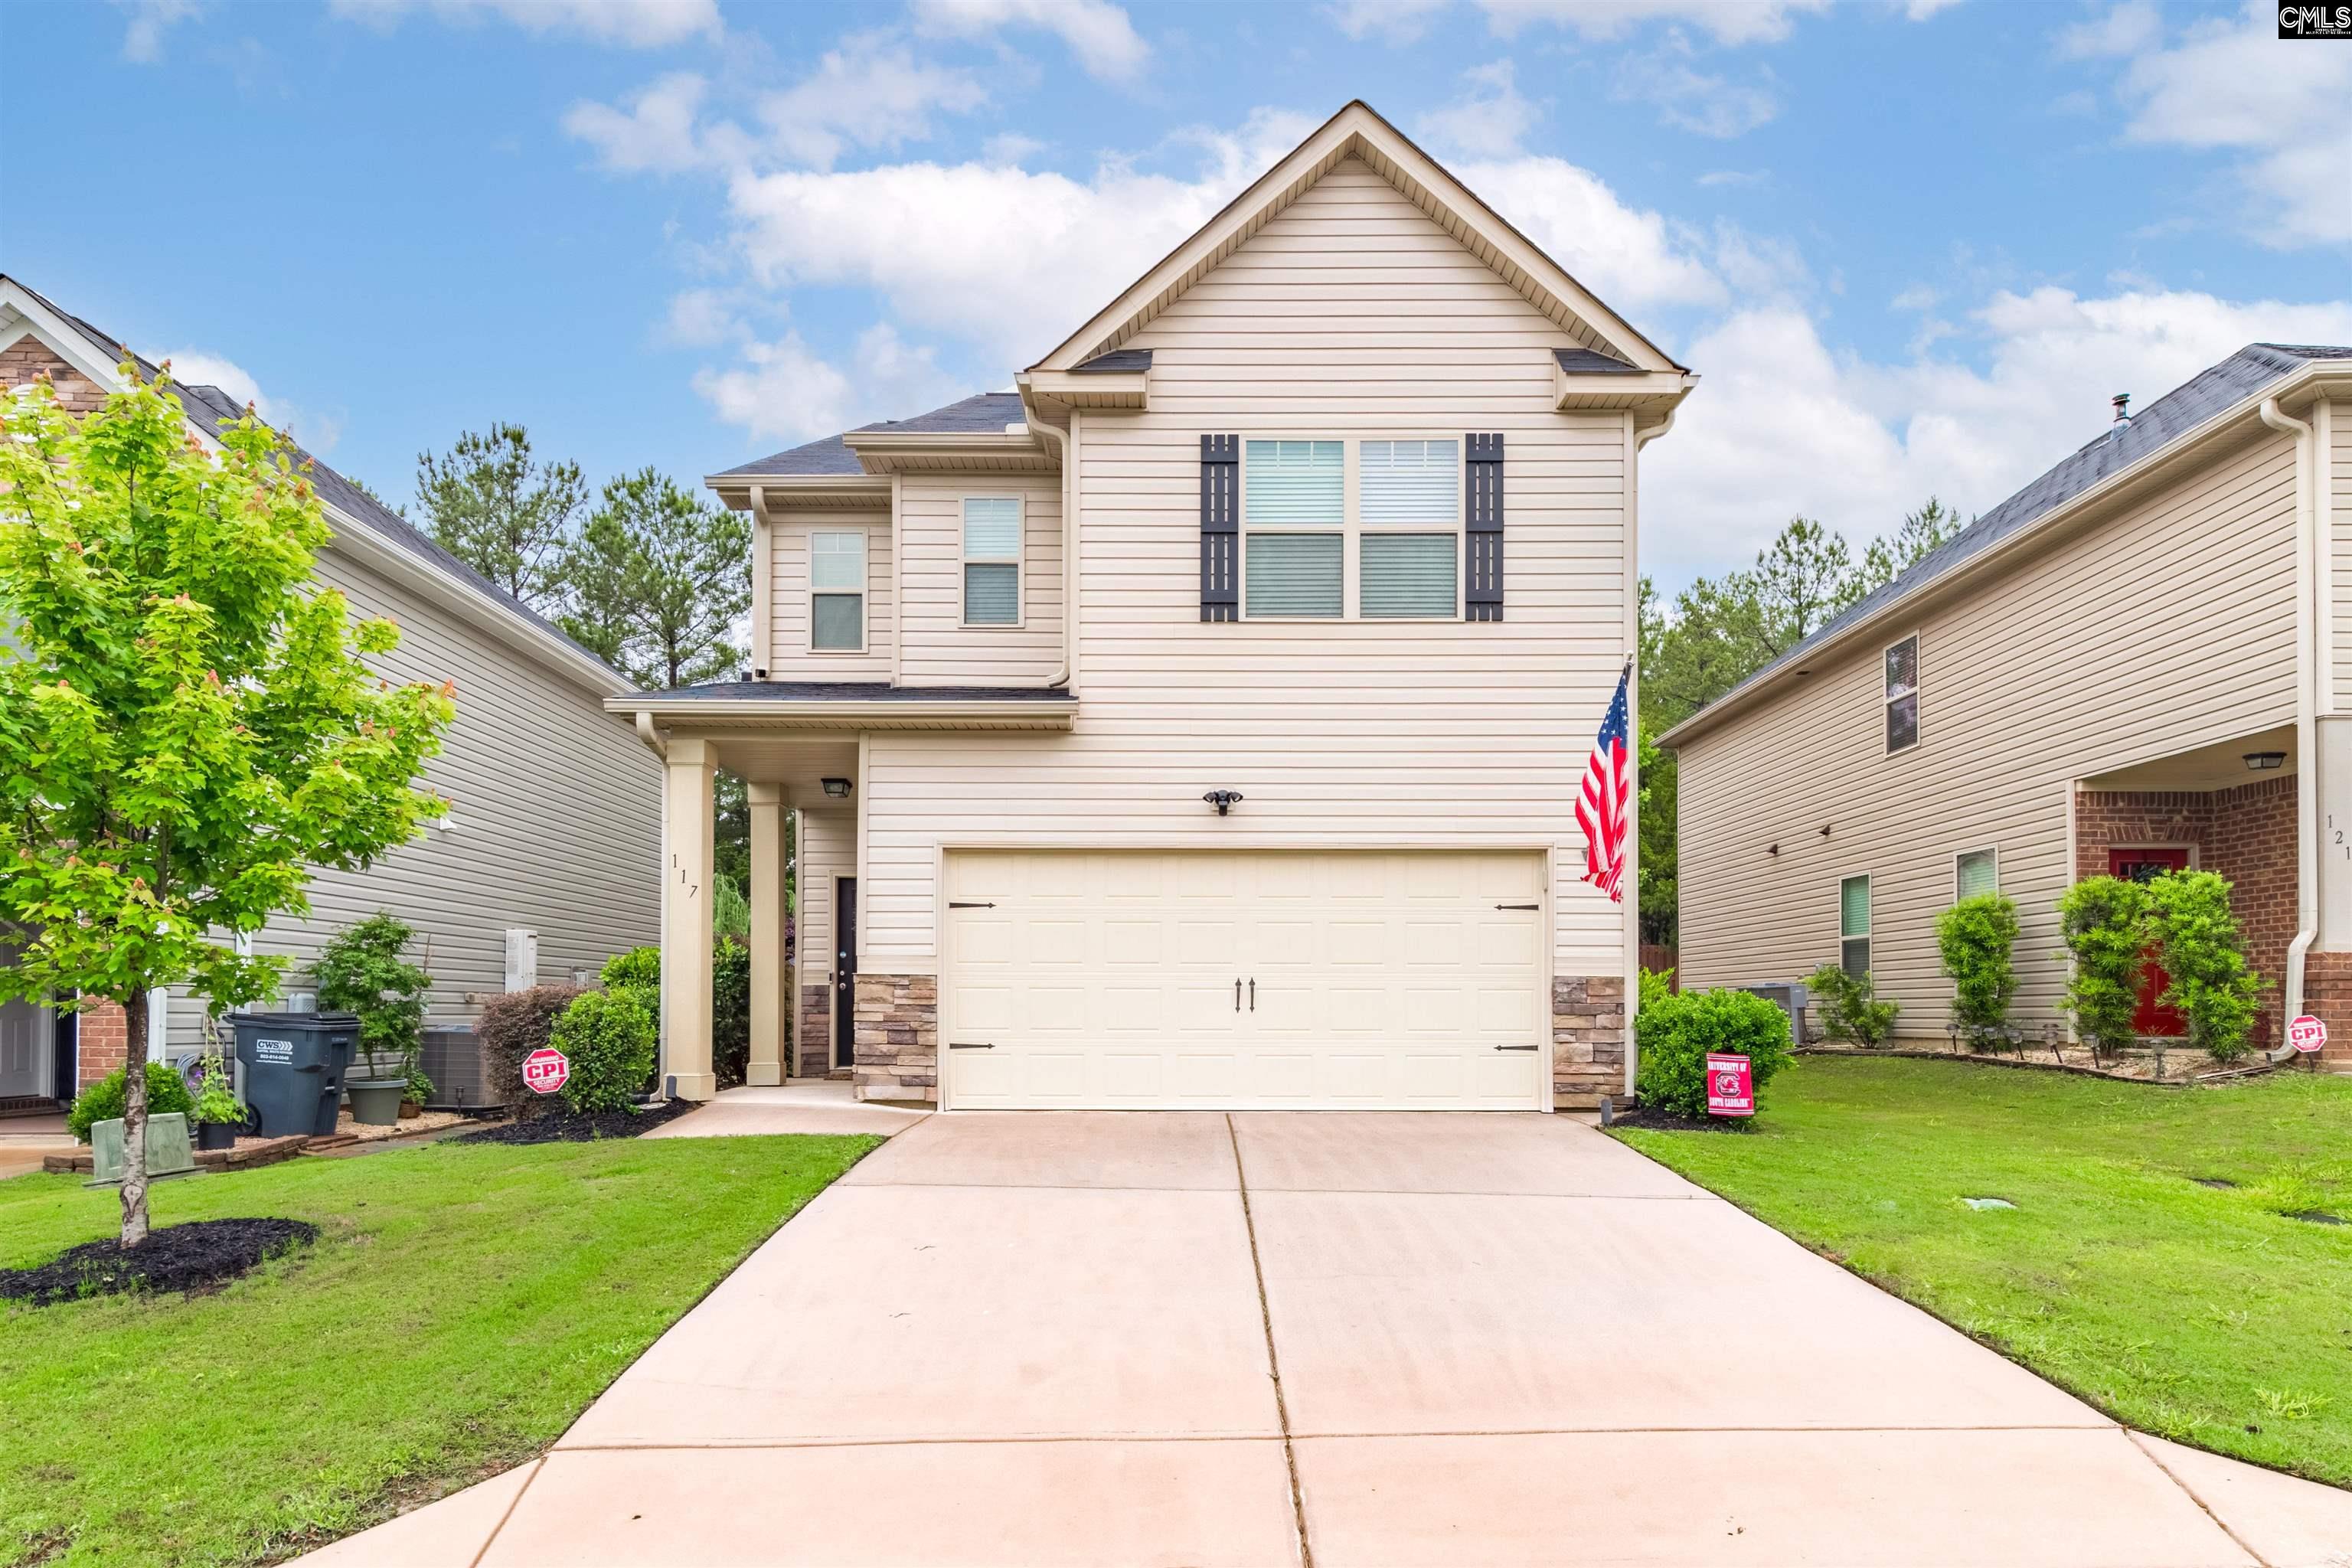 117 Bickley Manor Court Chapin, SC 29036